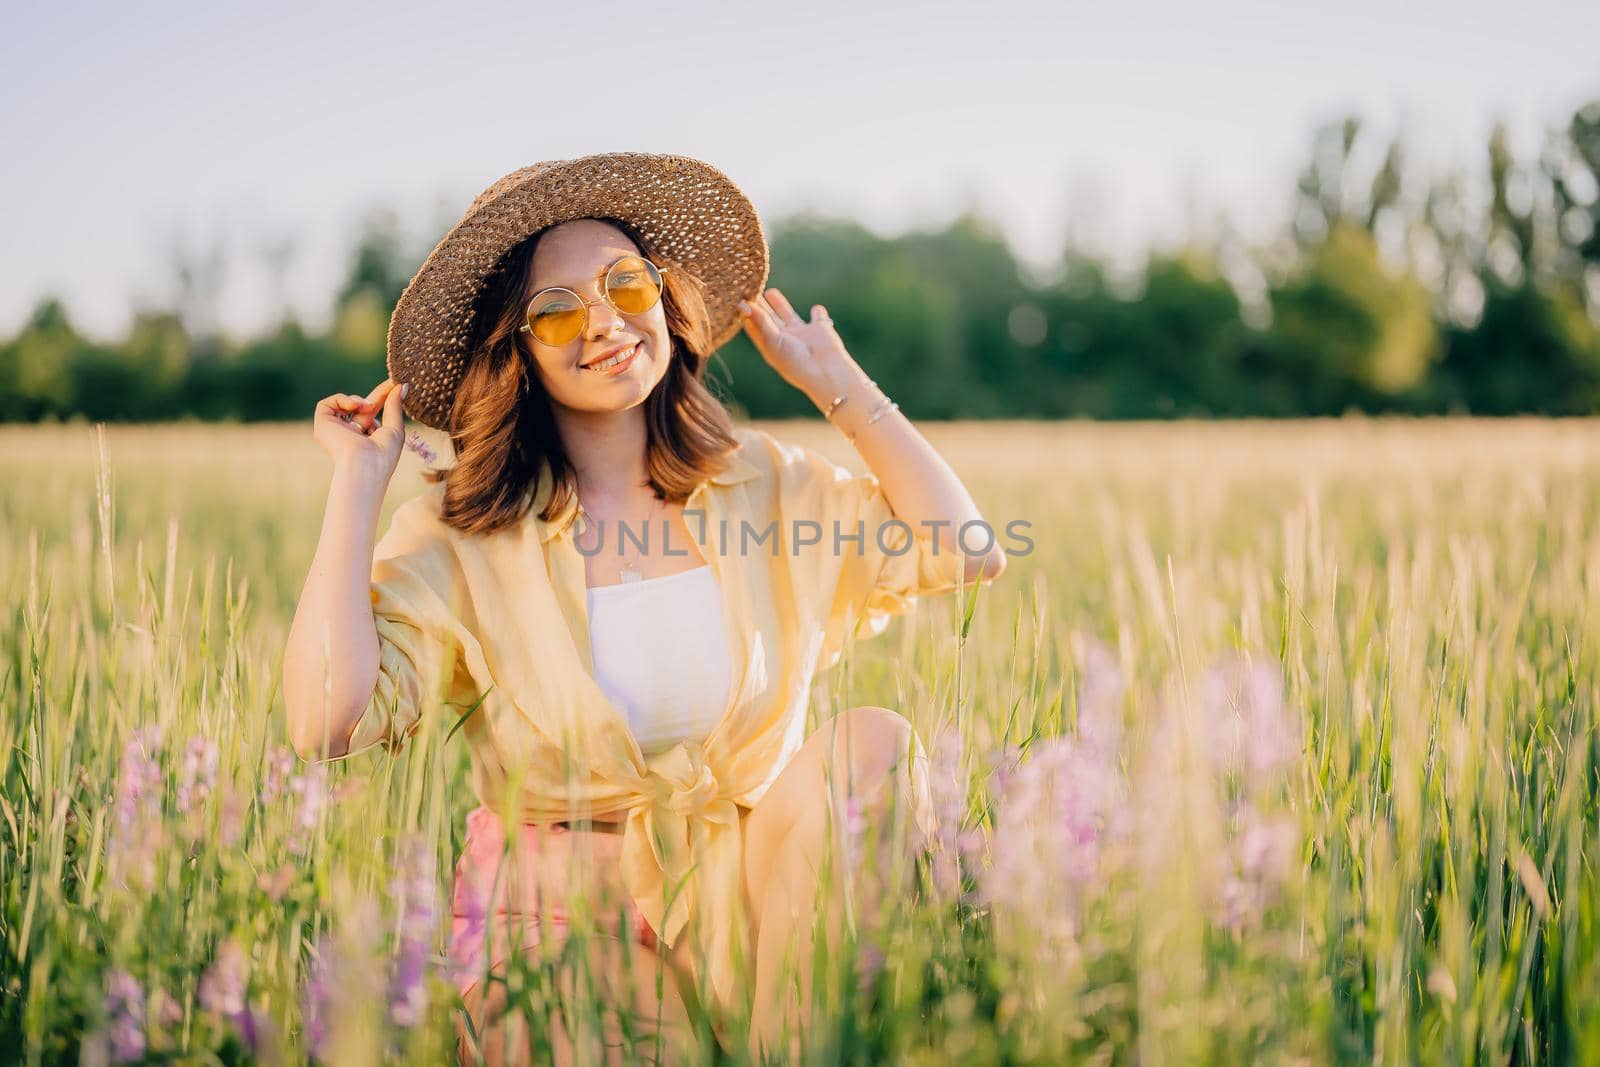 Portrait of happy woman in straw hat in fresh green wheat field. Grass background. Amazing nature, farmland, growing cereal plants. Stylish lady with eyewear. High quality photo